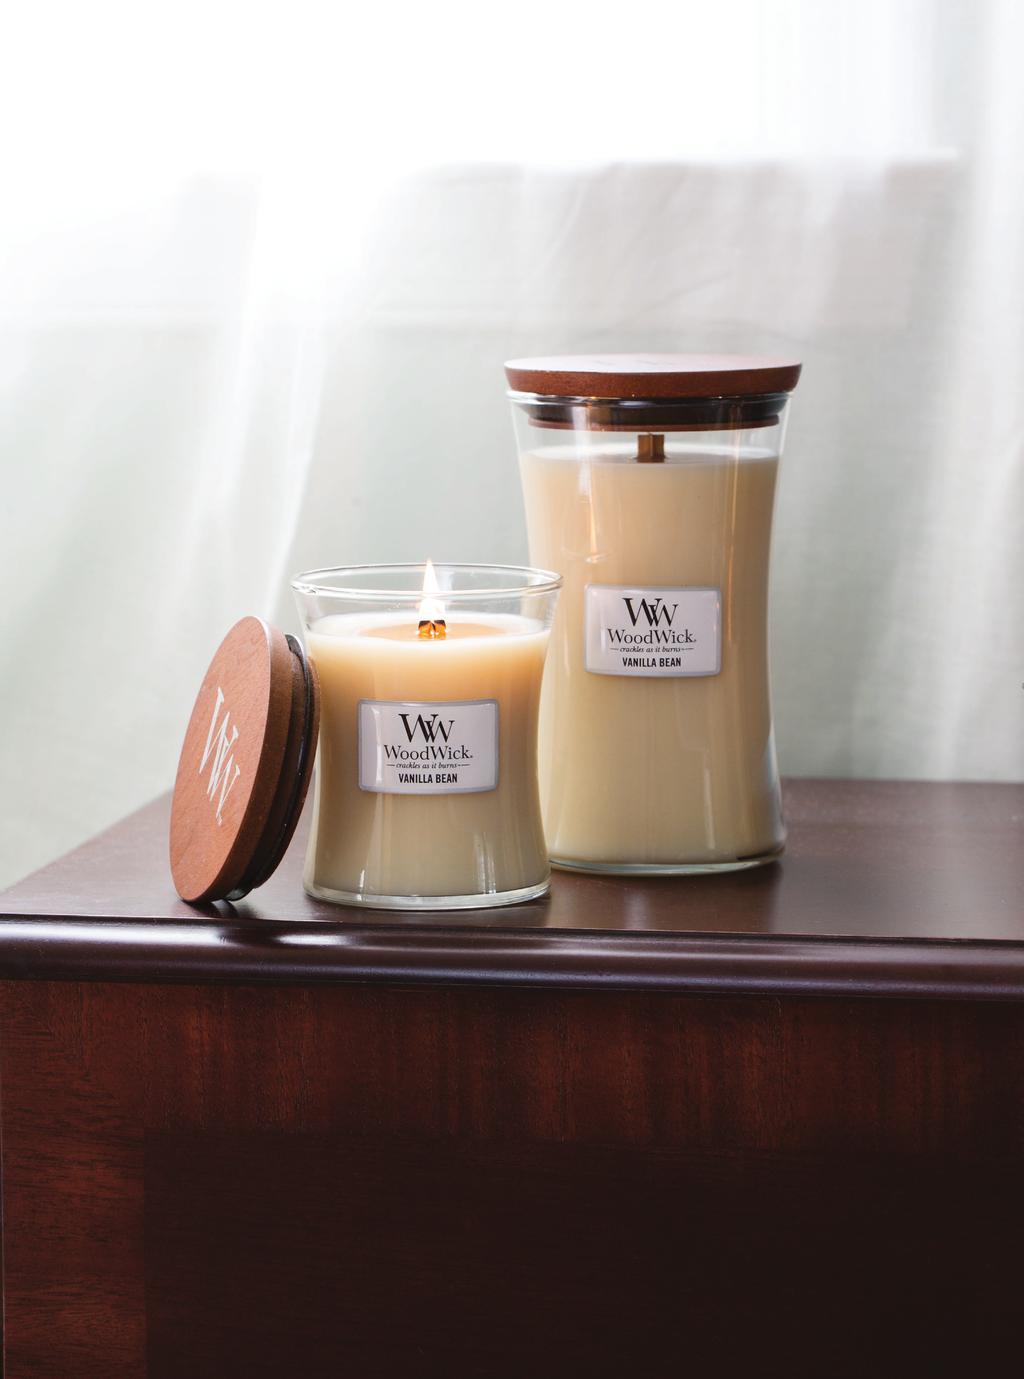 NATURAL WOODEN WICK creates the soothing sound of a Crackling Fire JAR $28 *Best Value - Double The Wax!